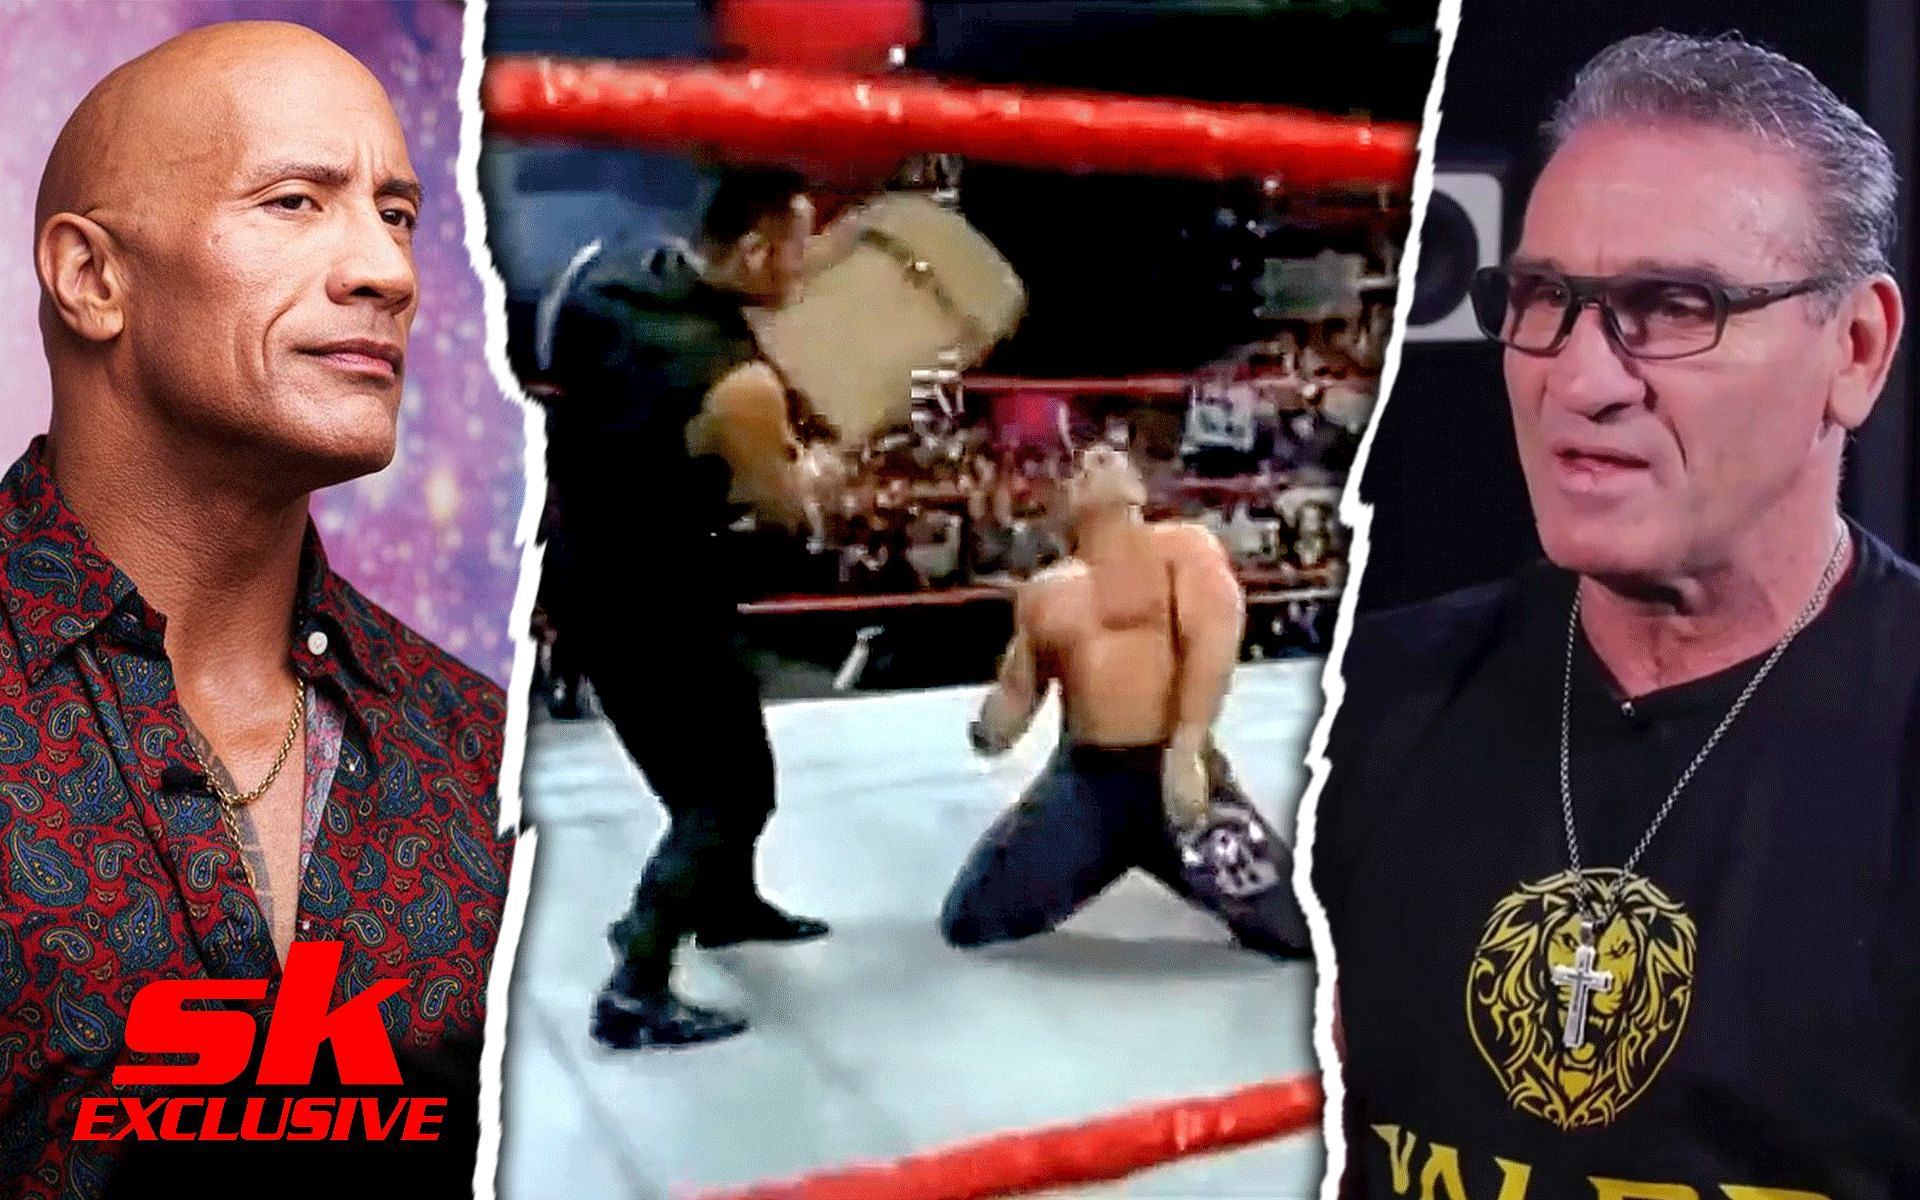  UFC Hall of Famer Ken Shamrock looks back on infamous WWE chair shot from The Rock [Images via: @WWFOldSchoolcom on Twitter, @therock and @kenshamrockofficial on Instagram]